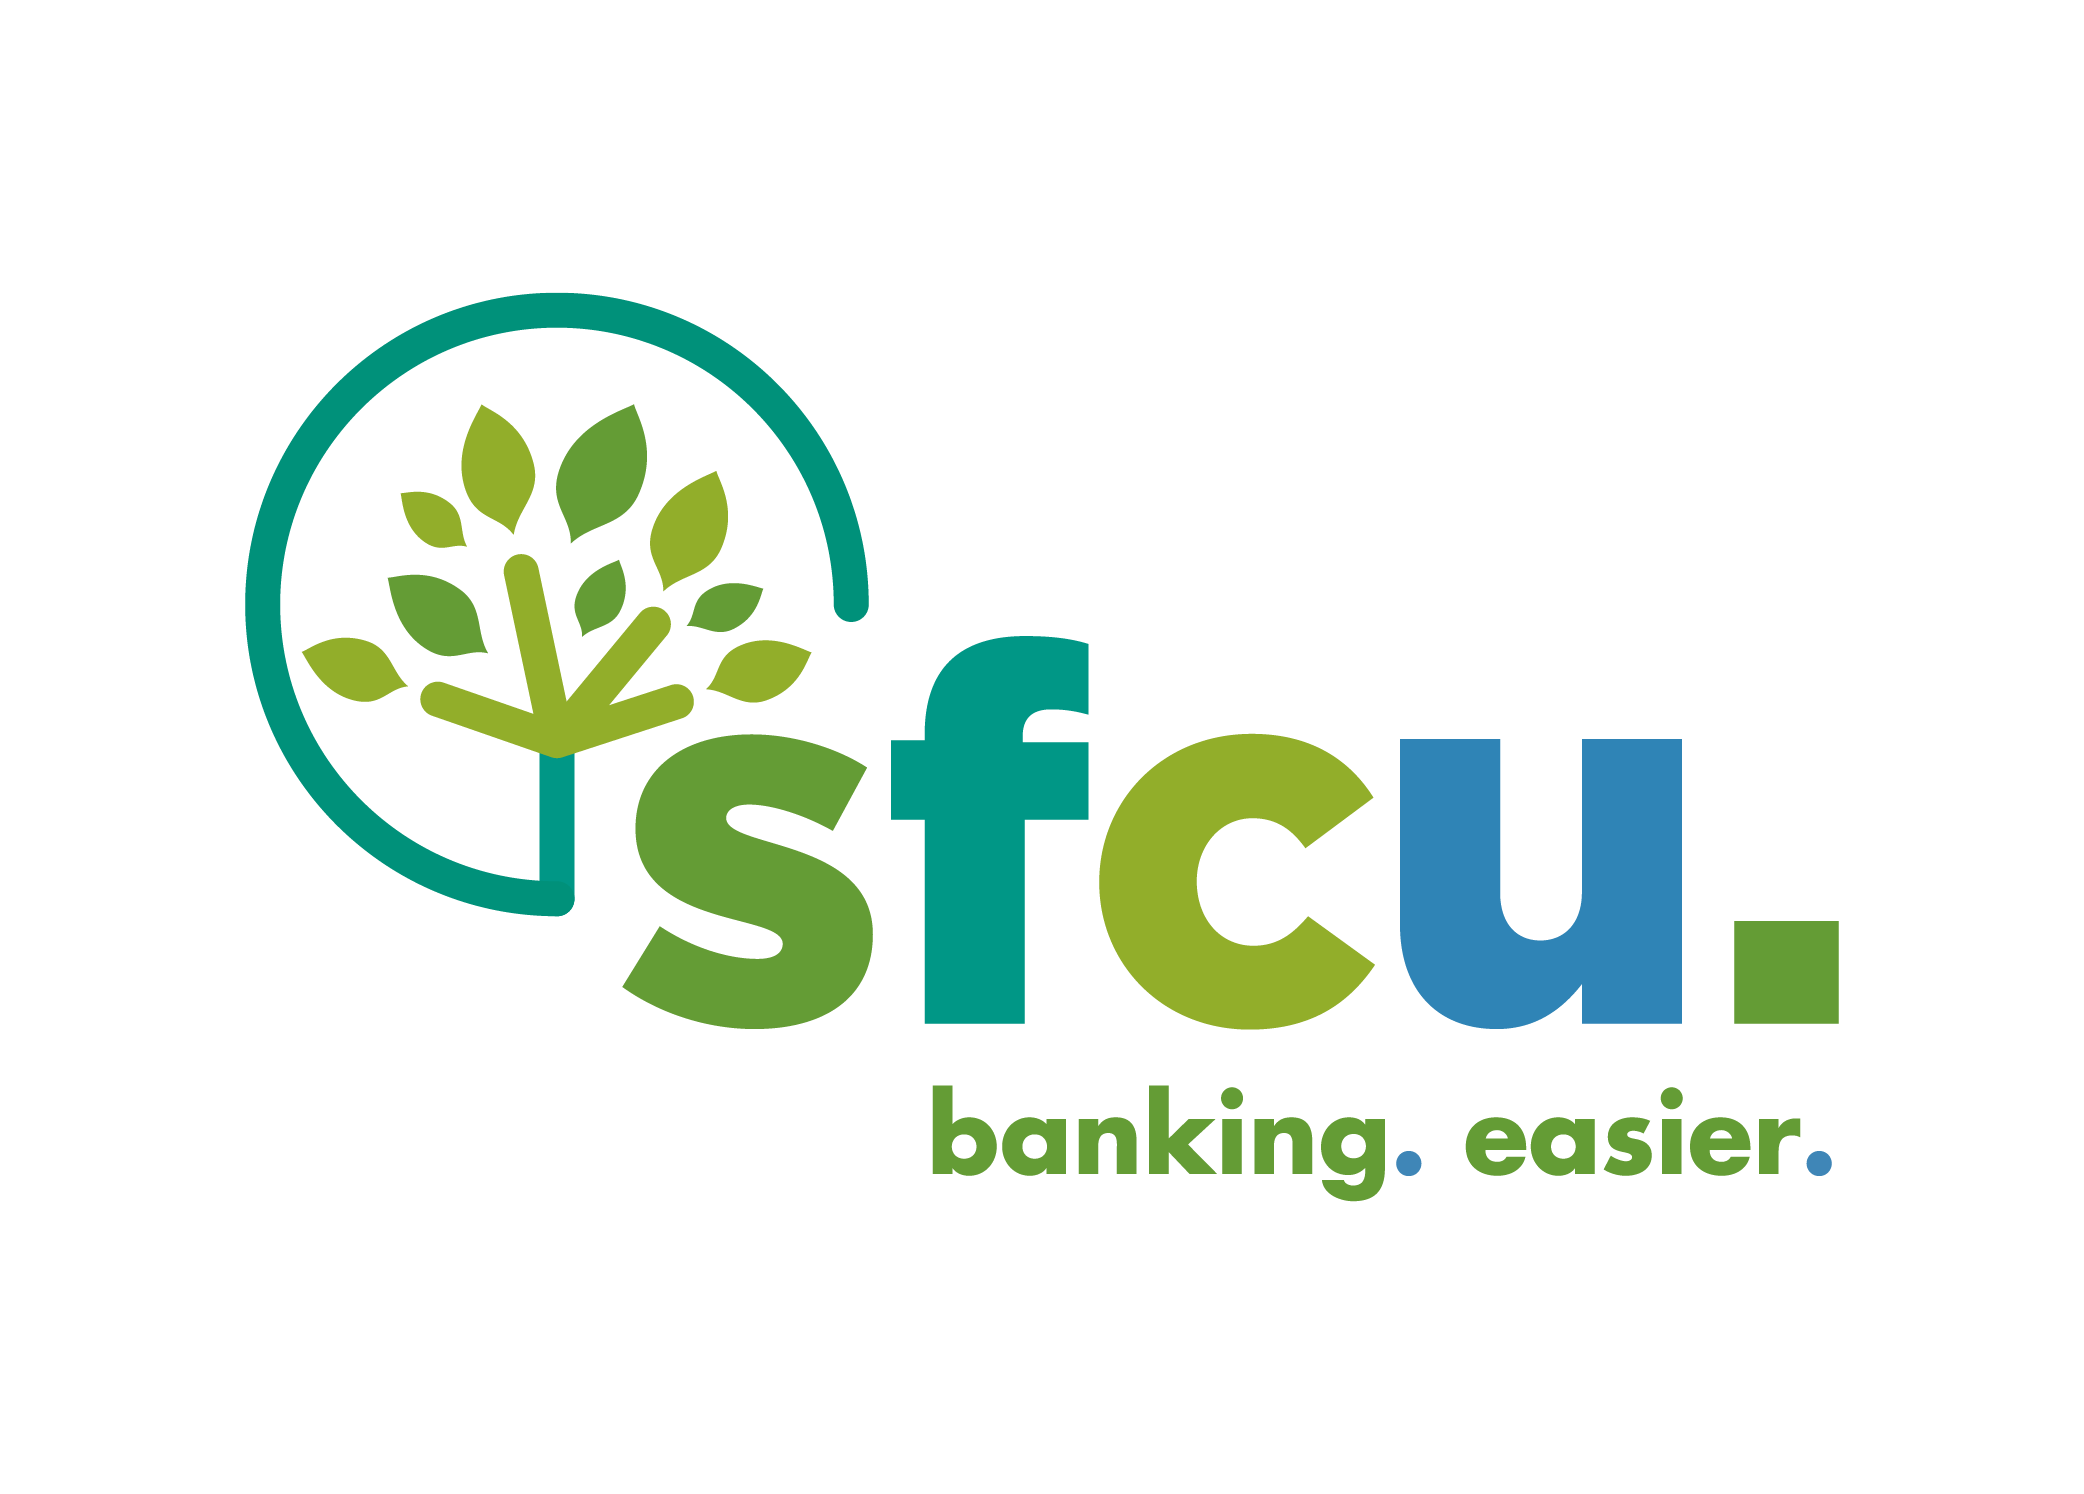 sfcu full color - Giving Tuesday 2021